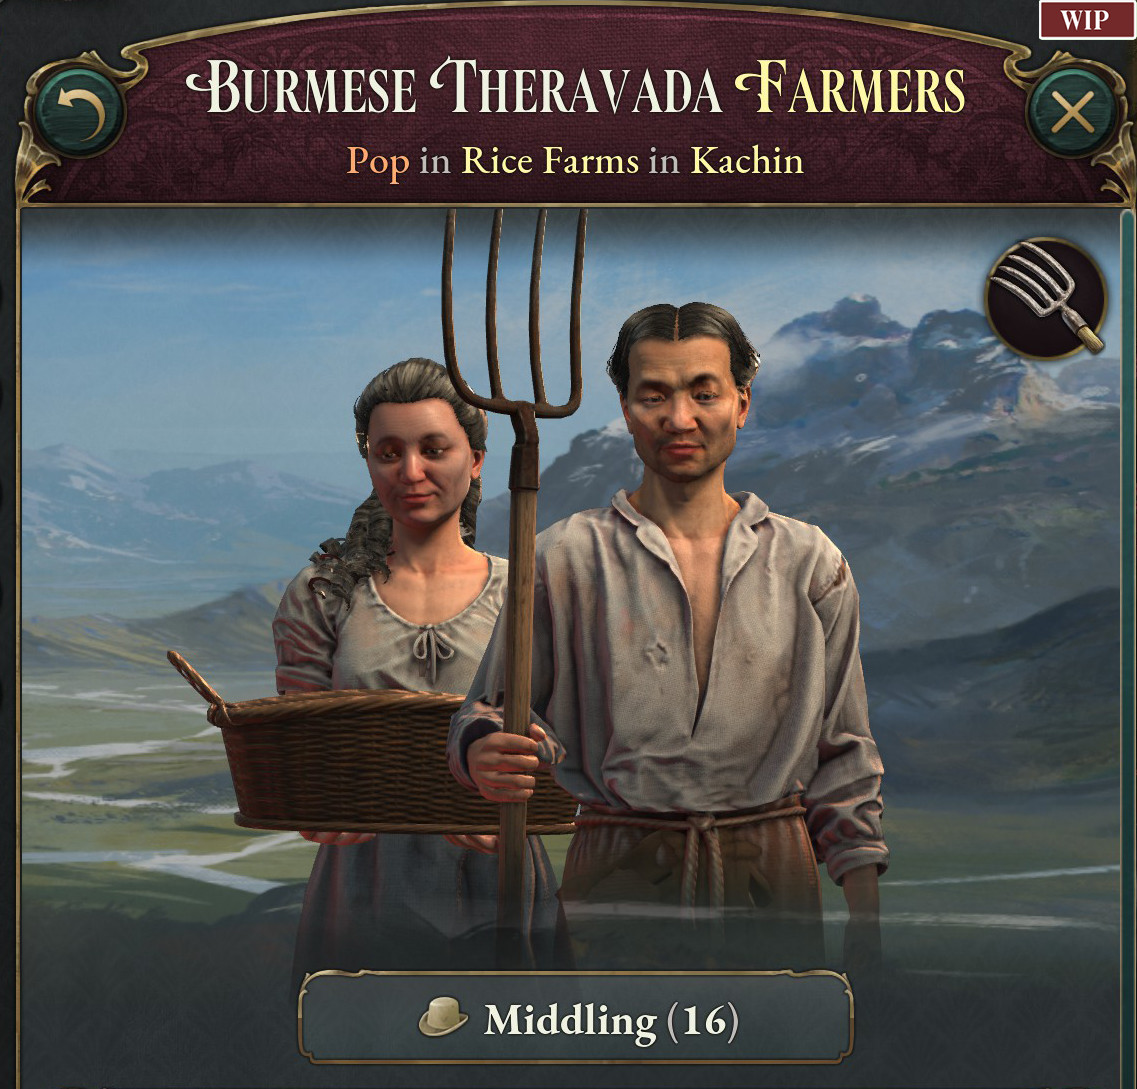 Victoria 3 - Dev Diary #49 - Graphics Overview, Page 3